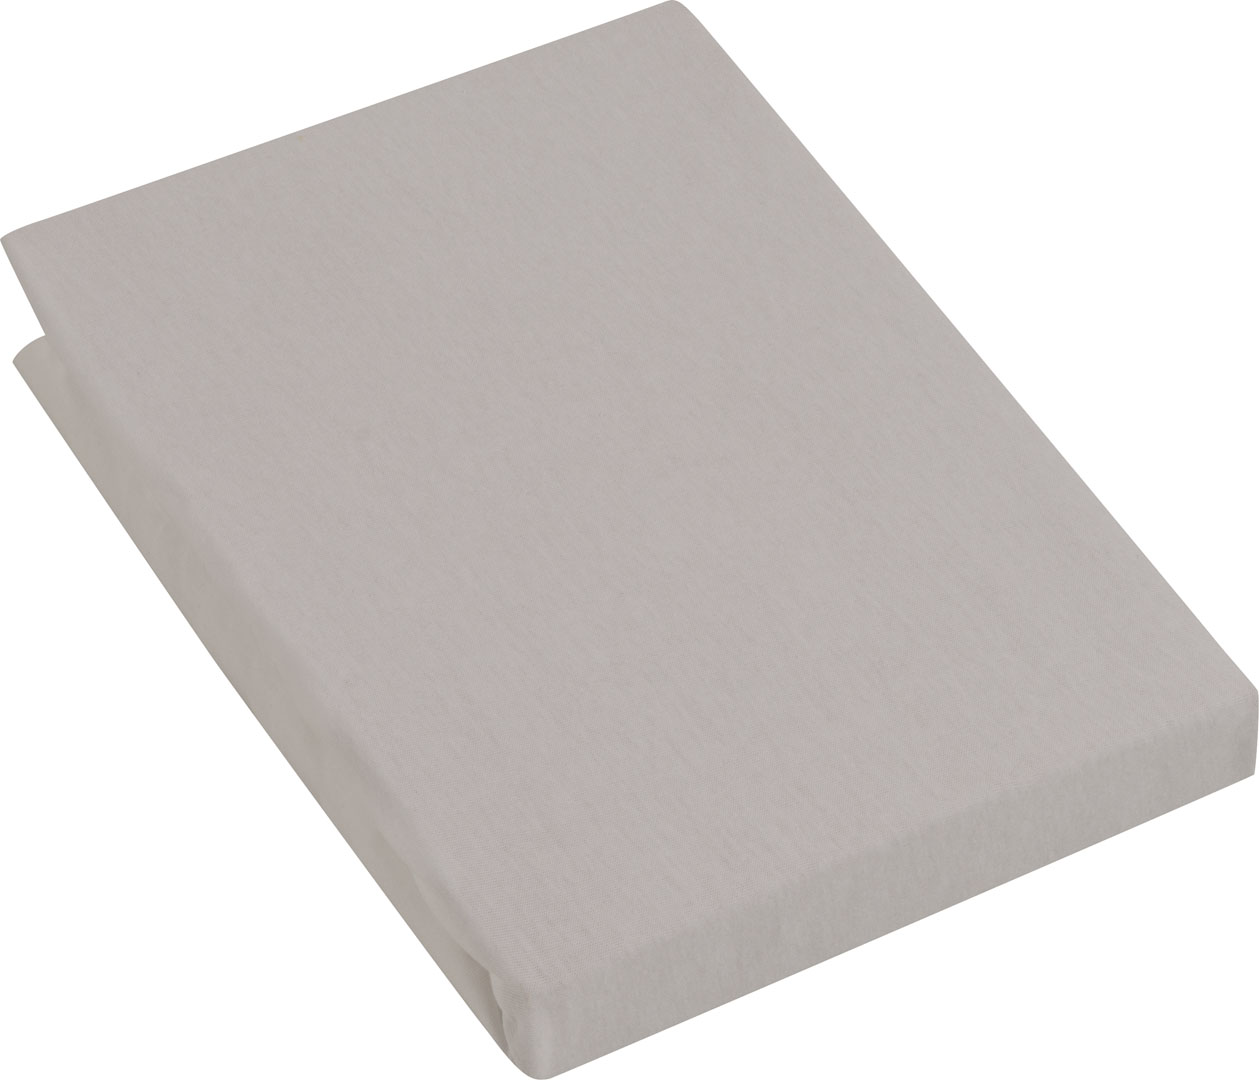 Fitted sheet white